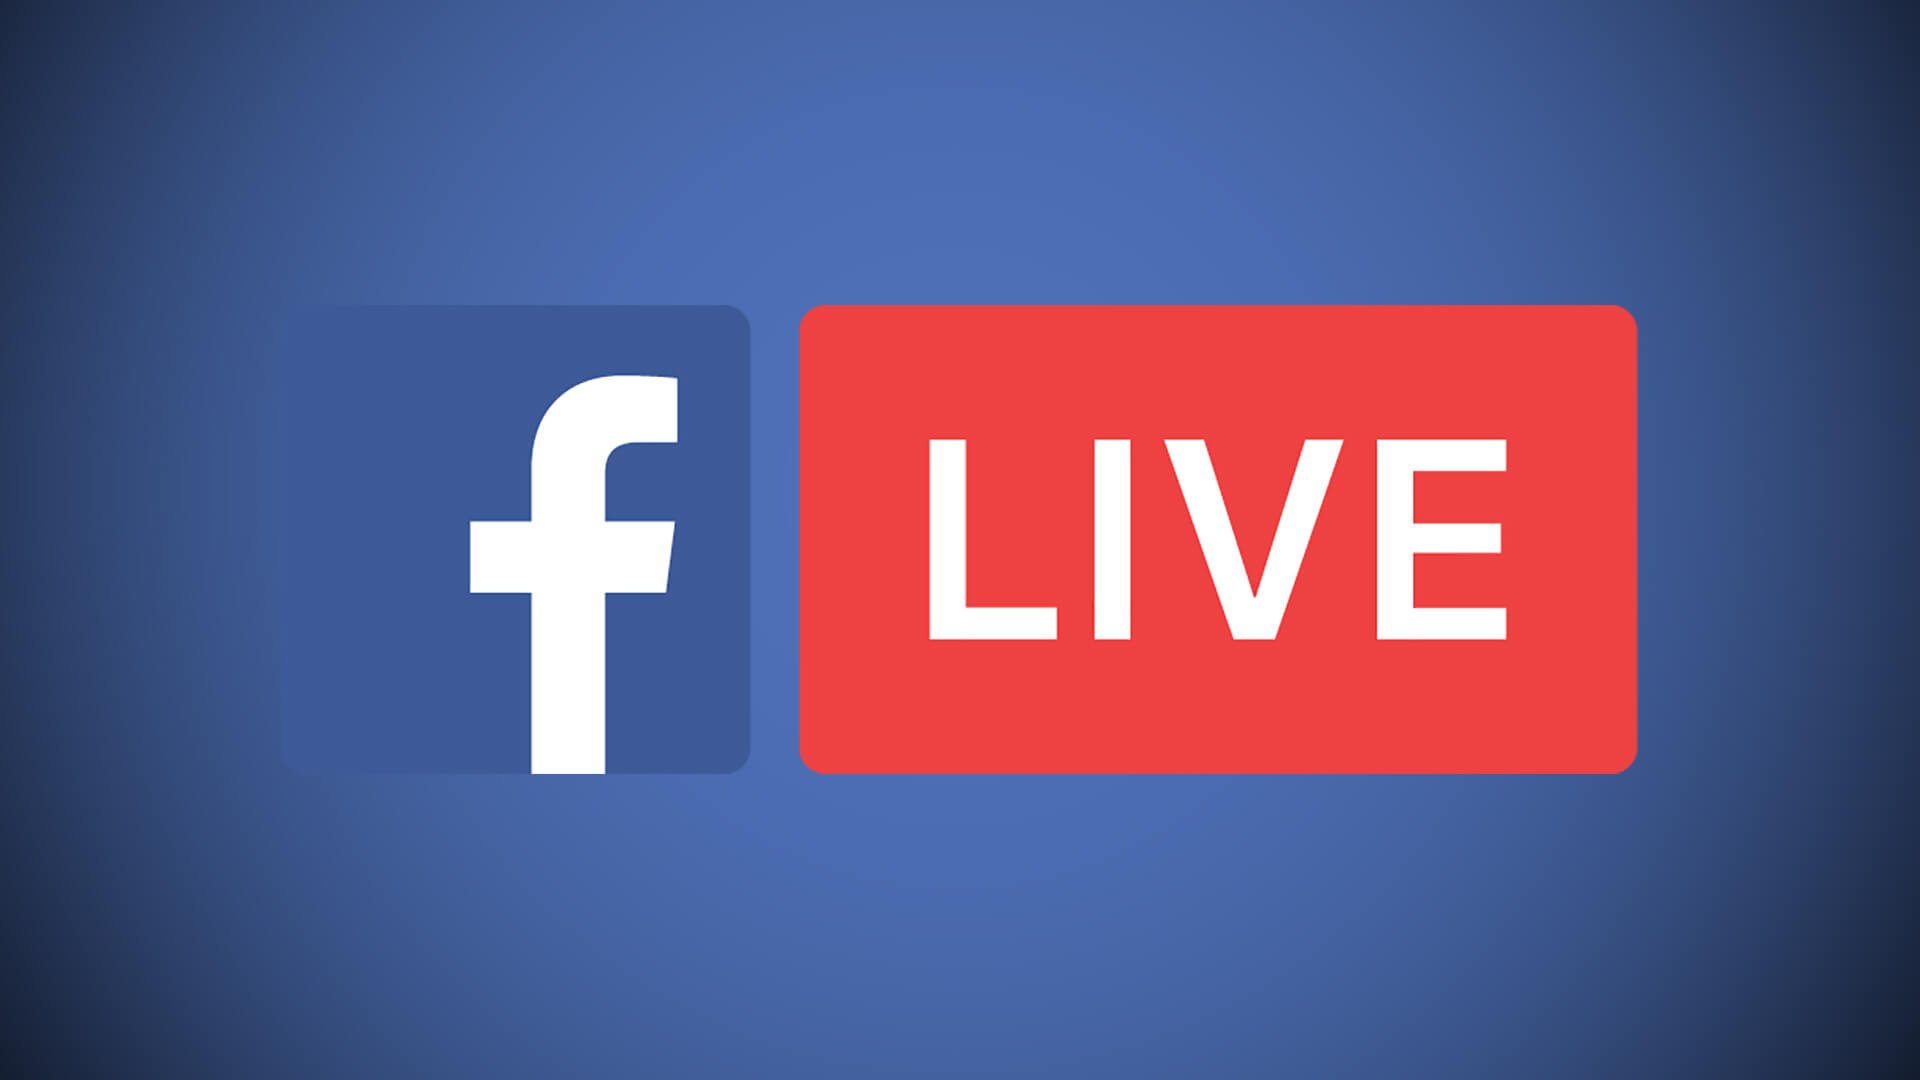 How to download Facebook Live Videos?